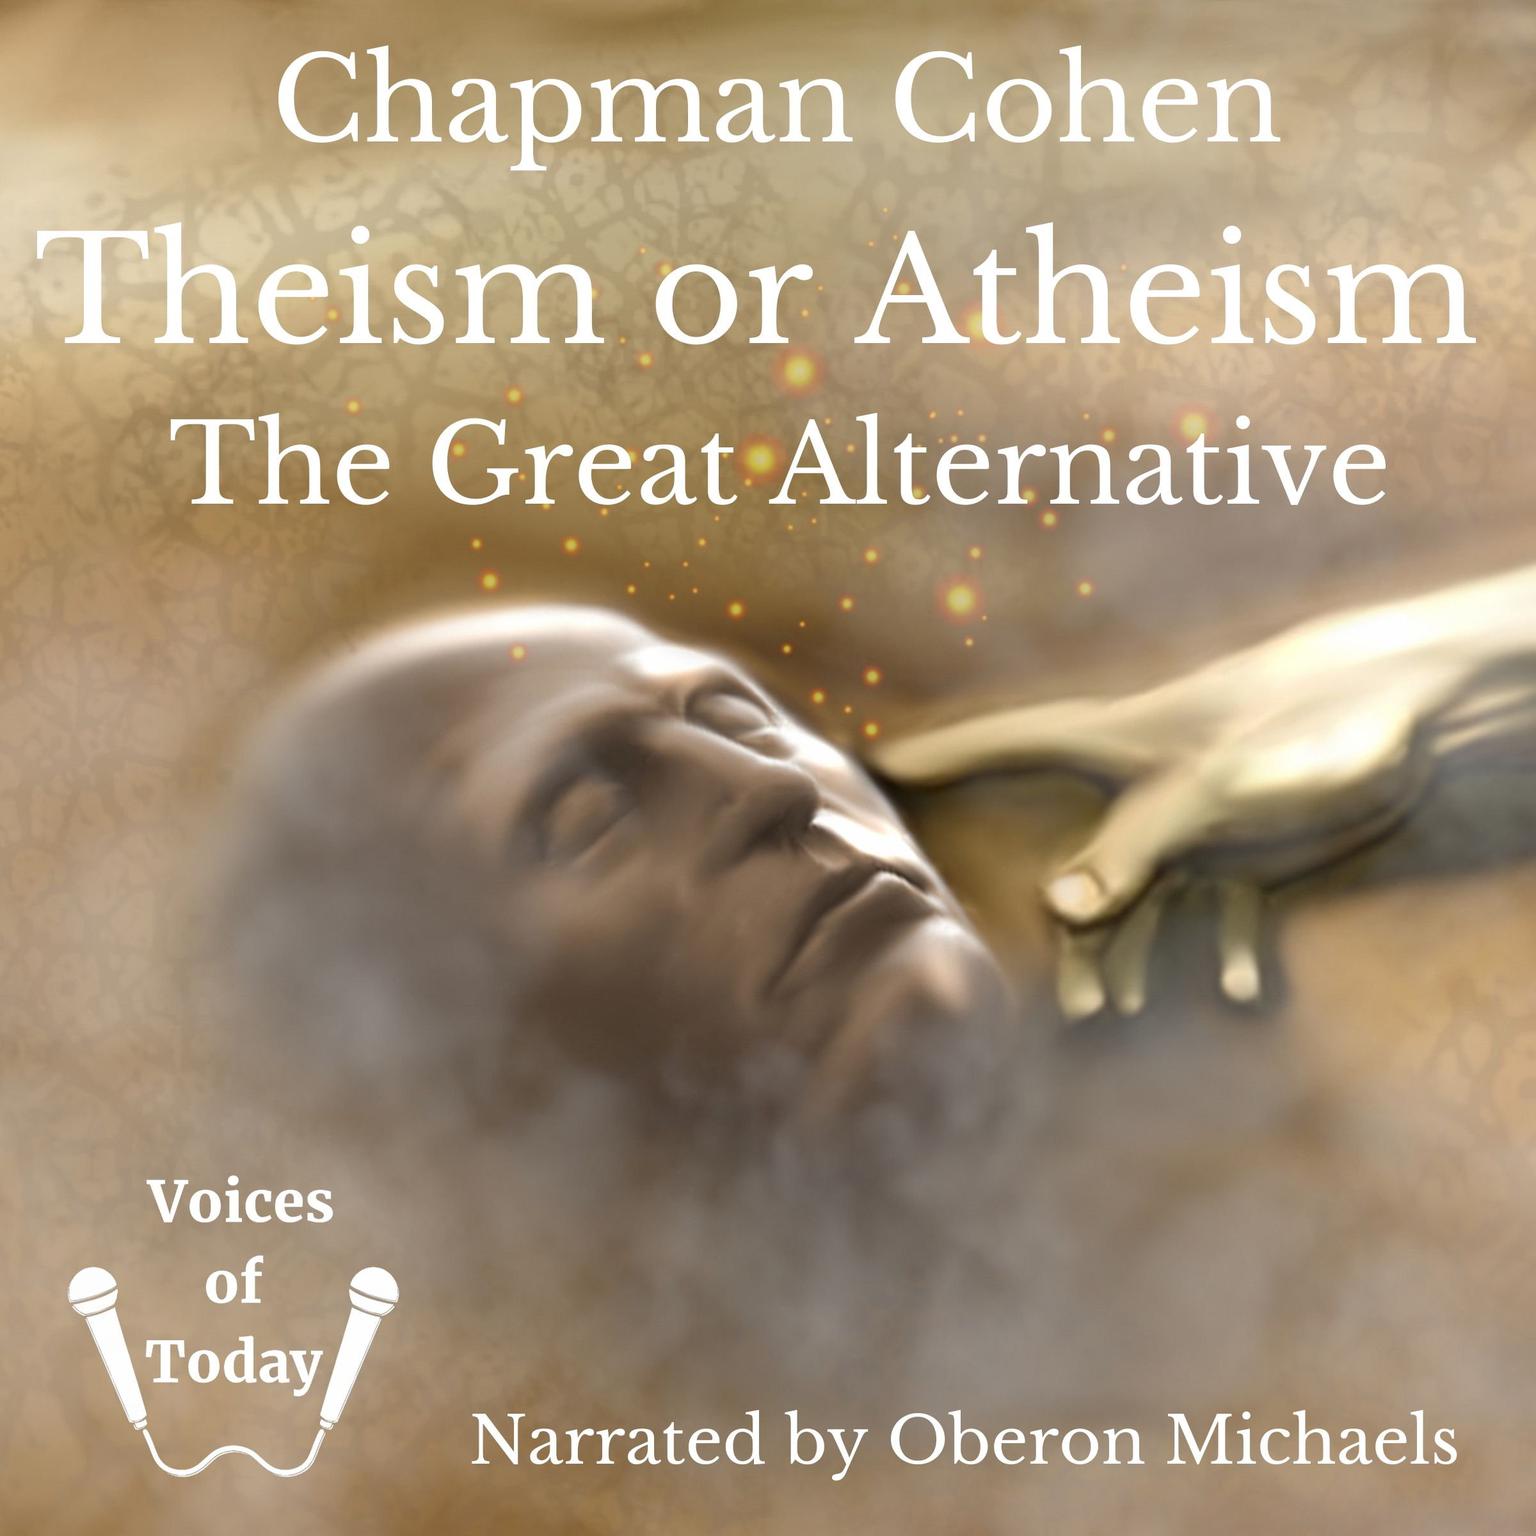 Theism or Atheism: The Great Alternative Audiobook, by Chapman Cohen